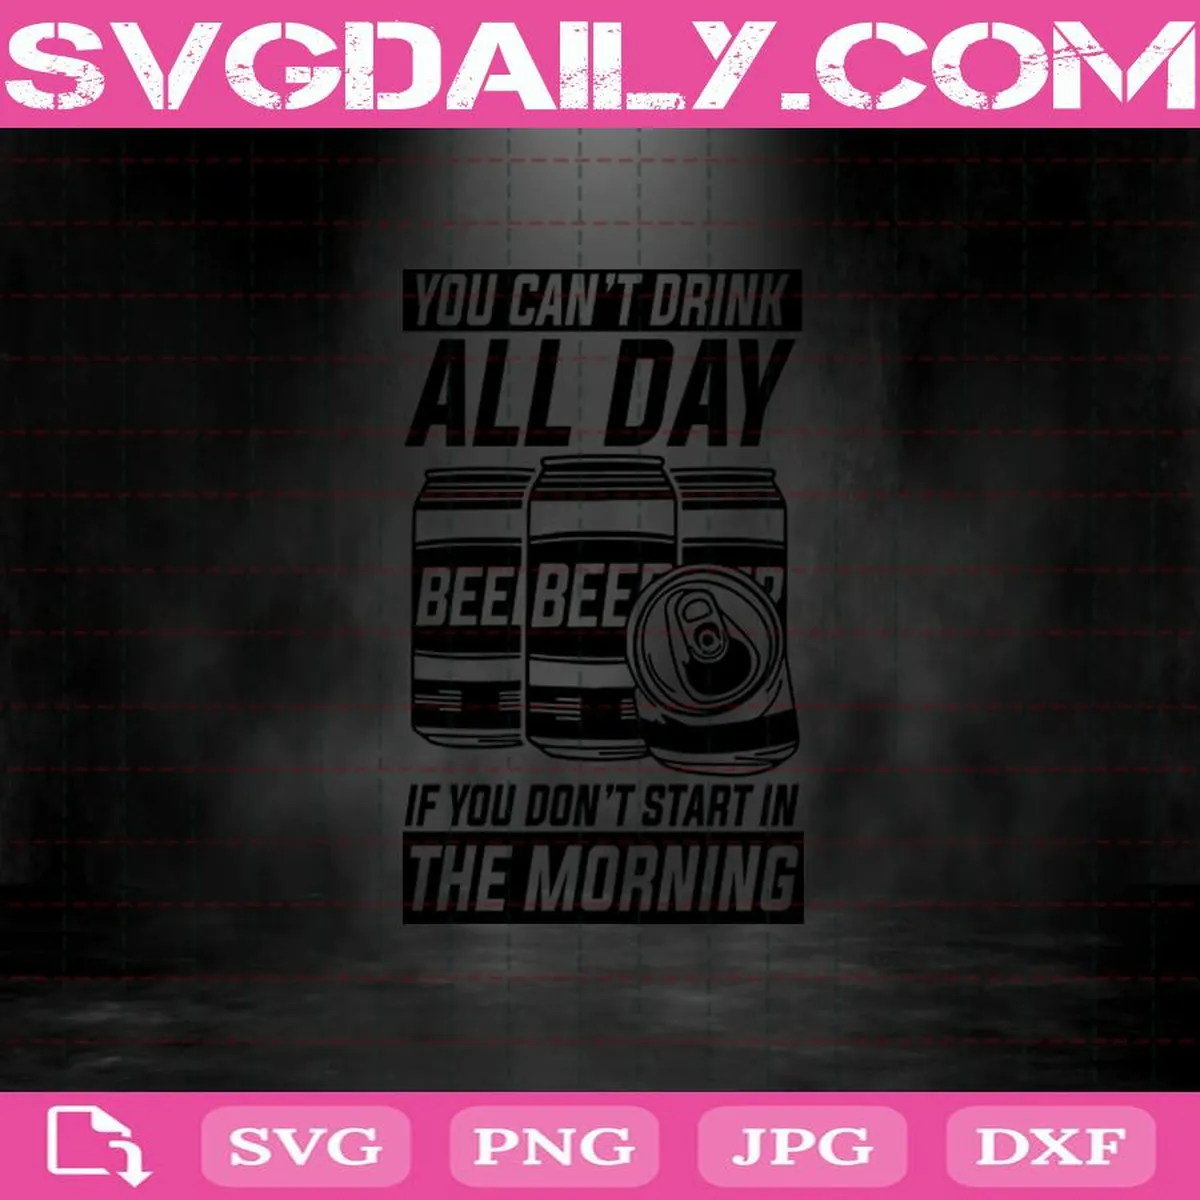 You Can’t Drink All Day If You Don’t Start In The Morning Svg, Drink Beer Svg, Beer Svg Png Dxf Eps Download Files